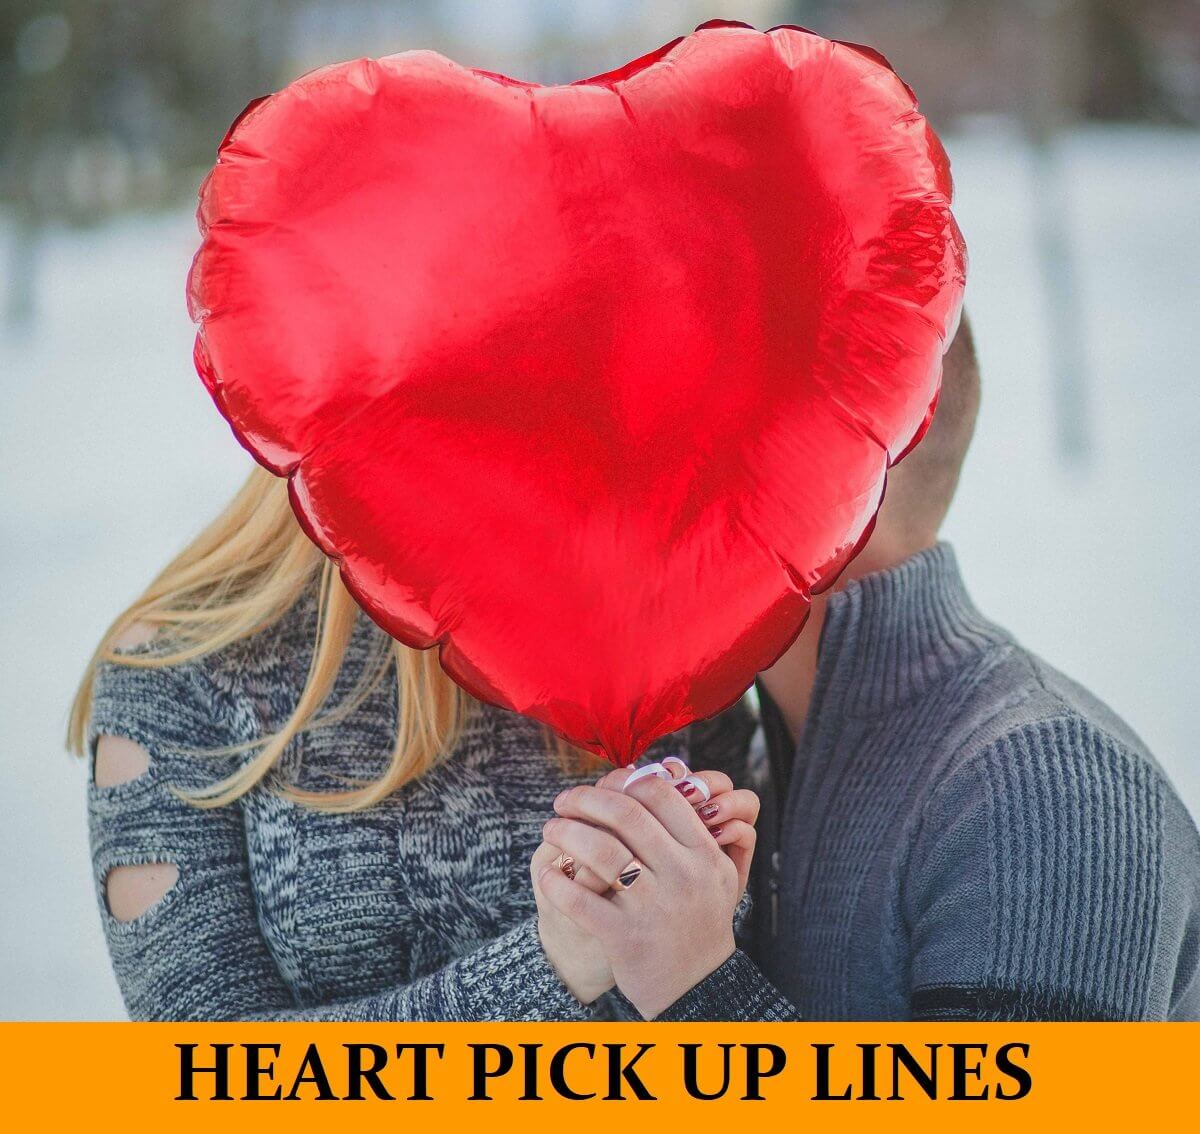 56 Pick Up Lines About Heart [Funny, Dirty, Cheesy]